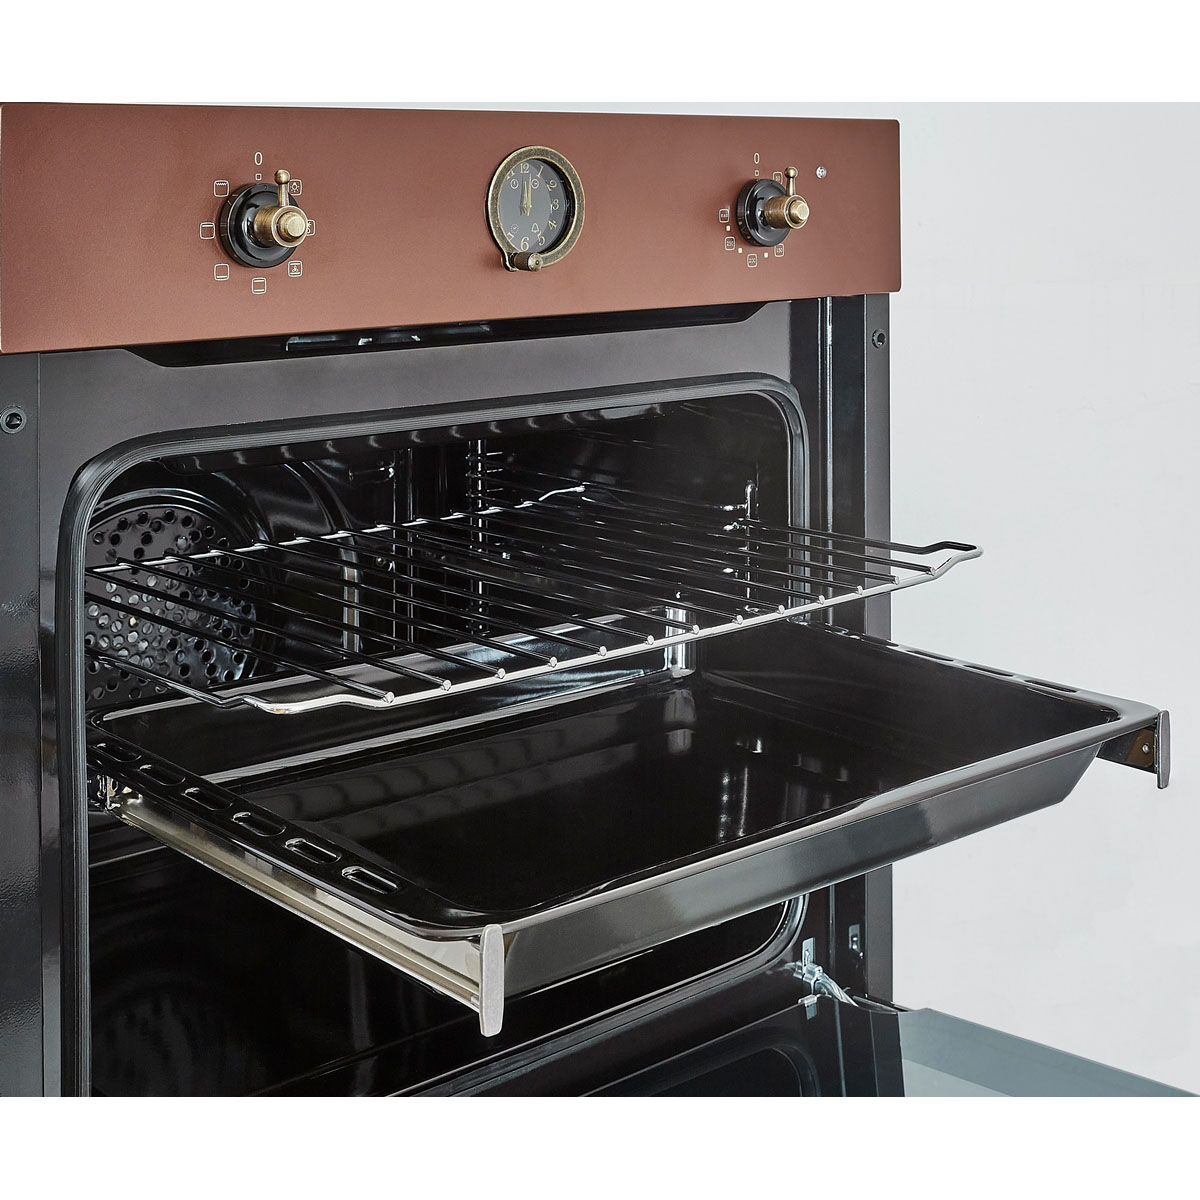 console Diplomacy Fitness Oven Freggia OERD67CO — Ovens — Built-in — Products — Freggia